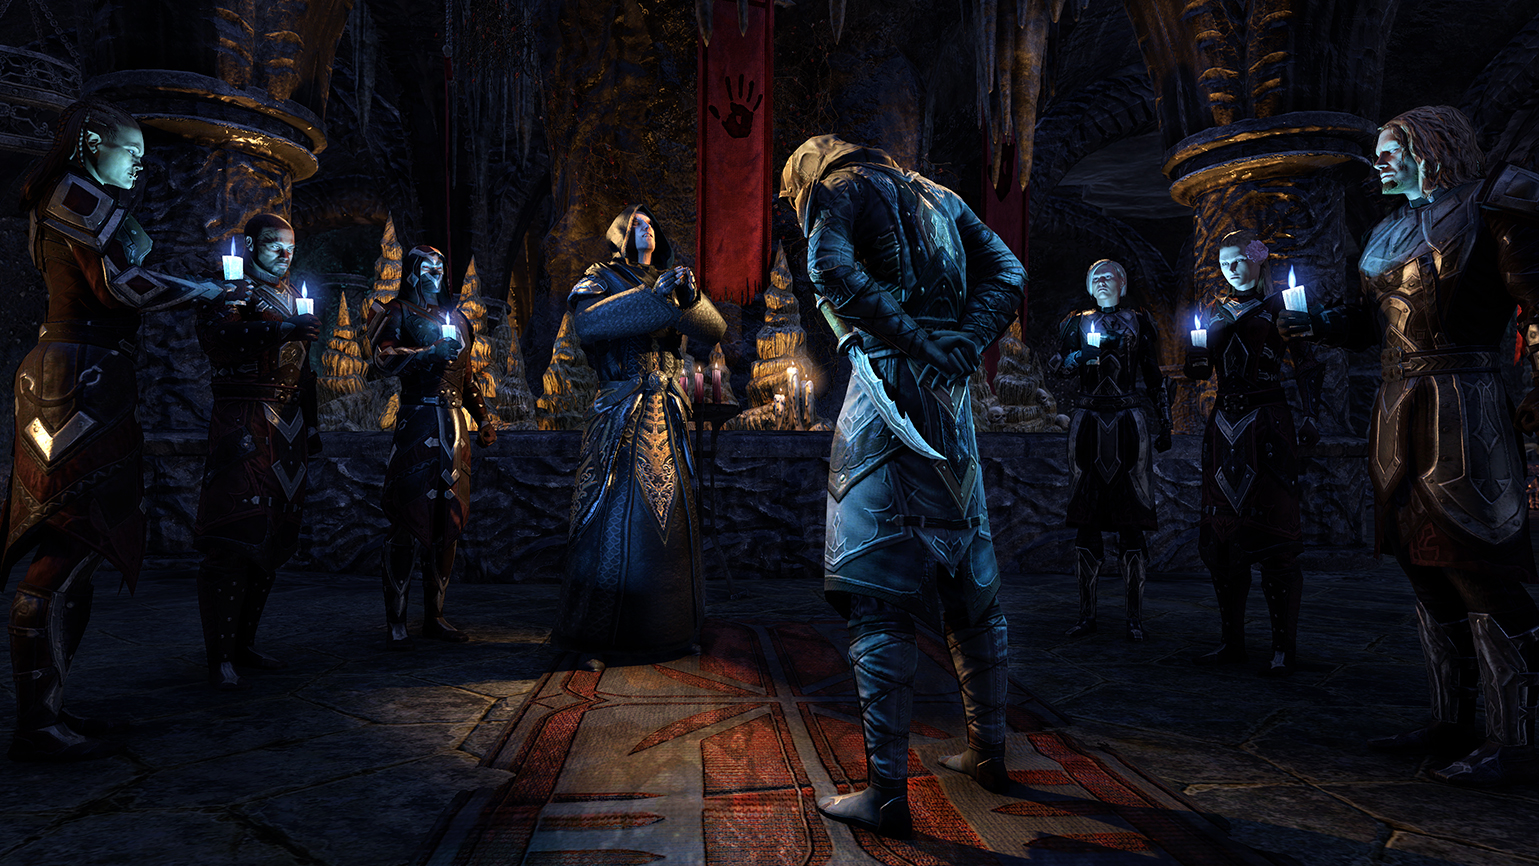 the elder scrolls online gold edition review